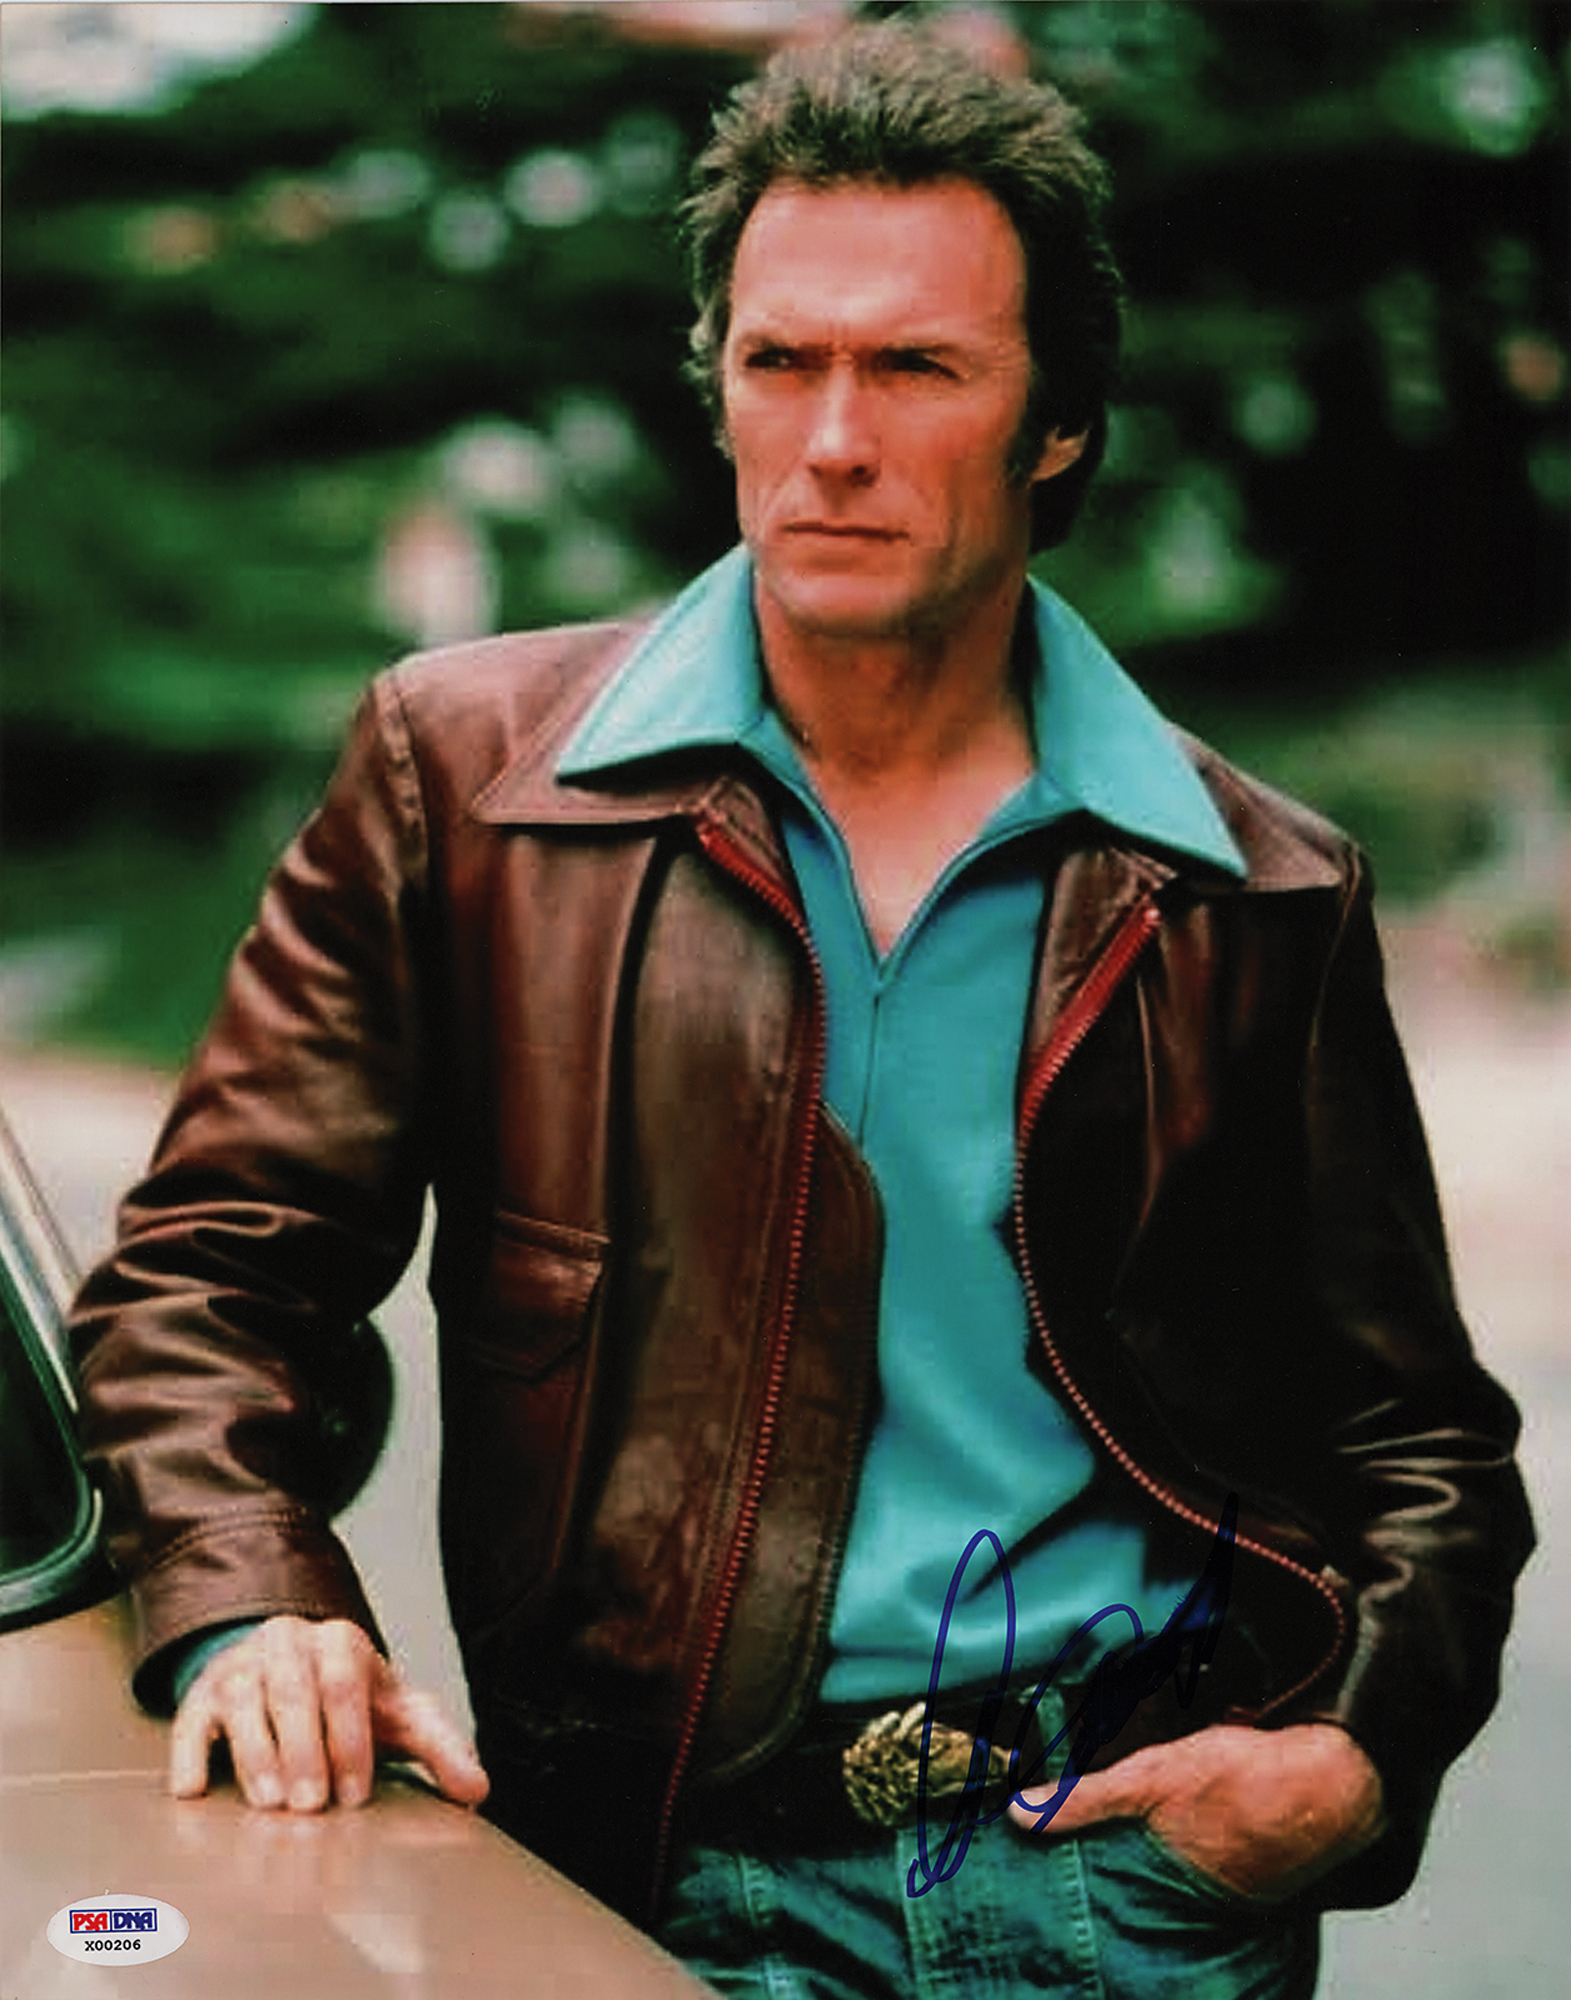 Clint Eastwood Signed Oversized Photograph Rr Auction